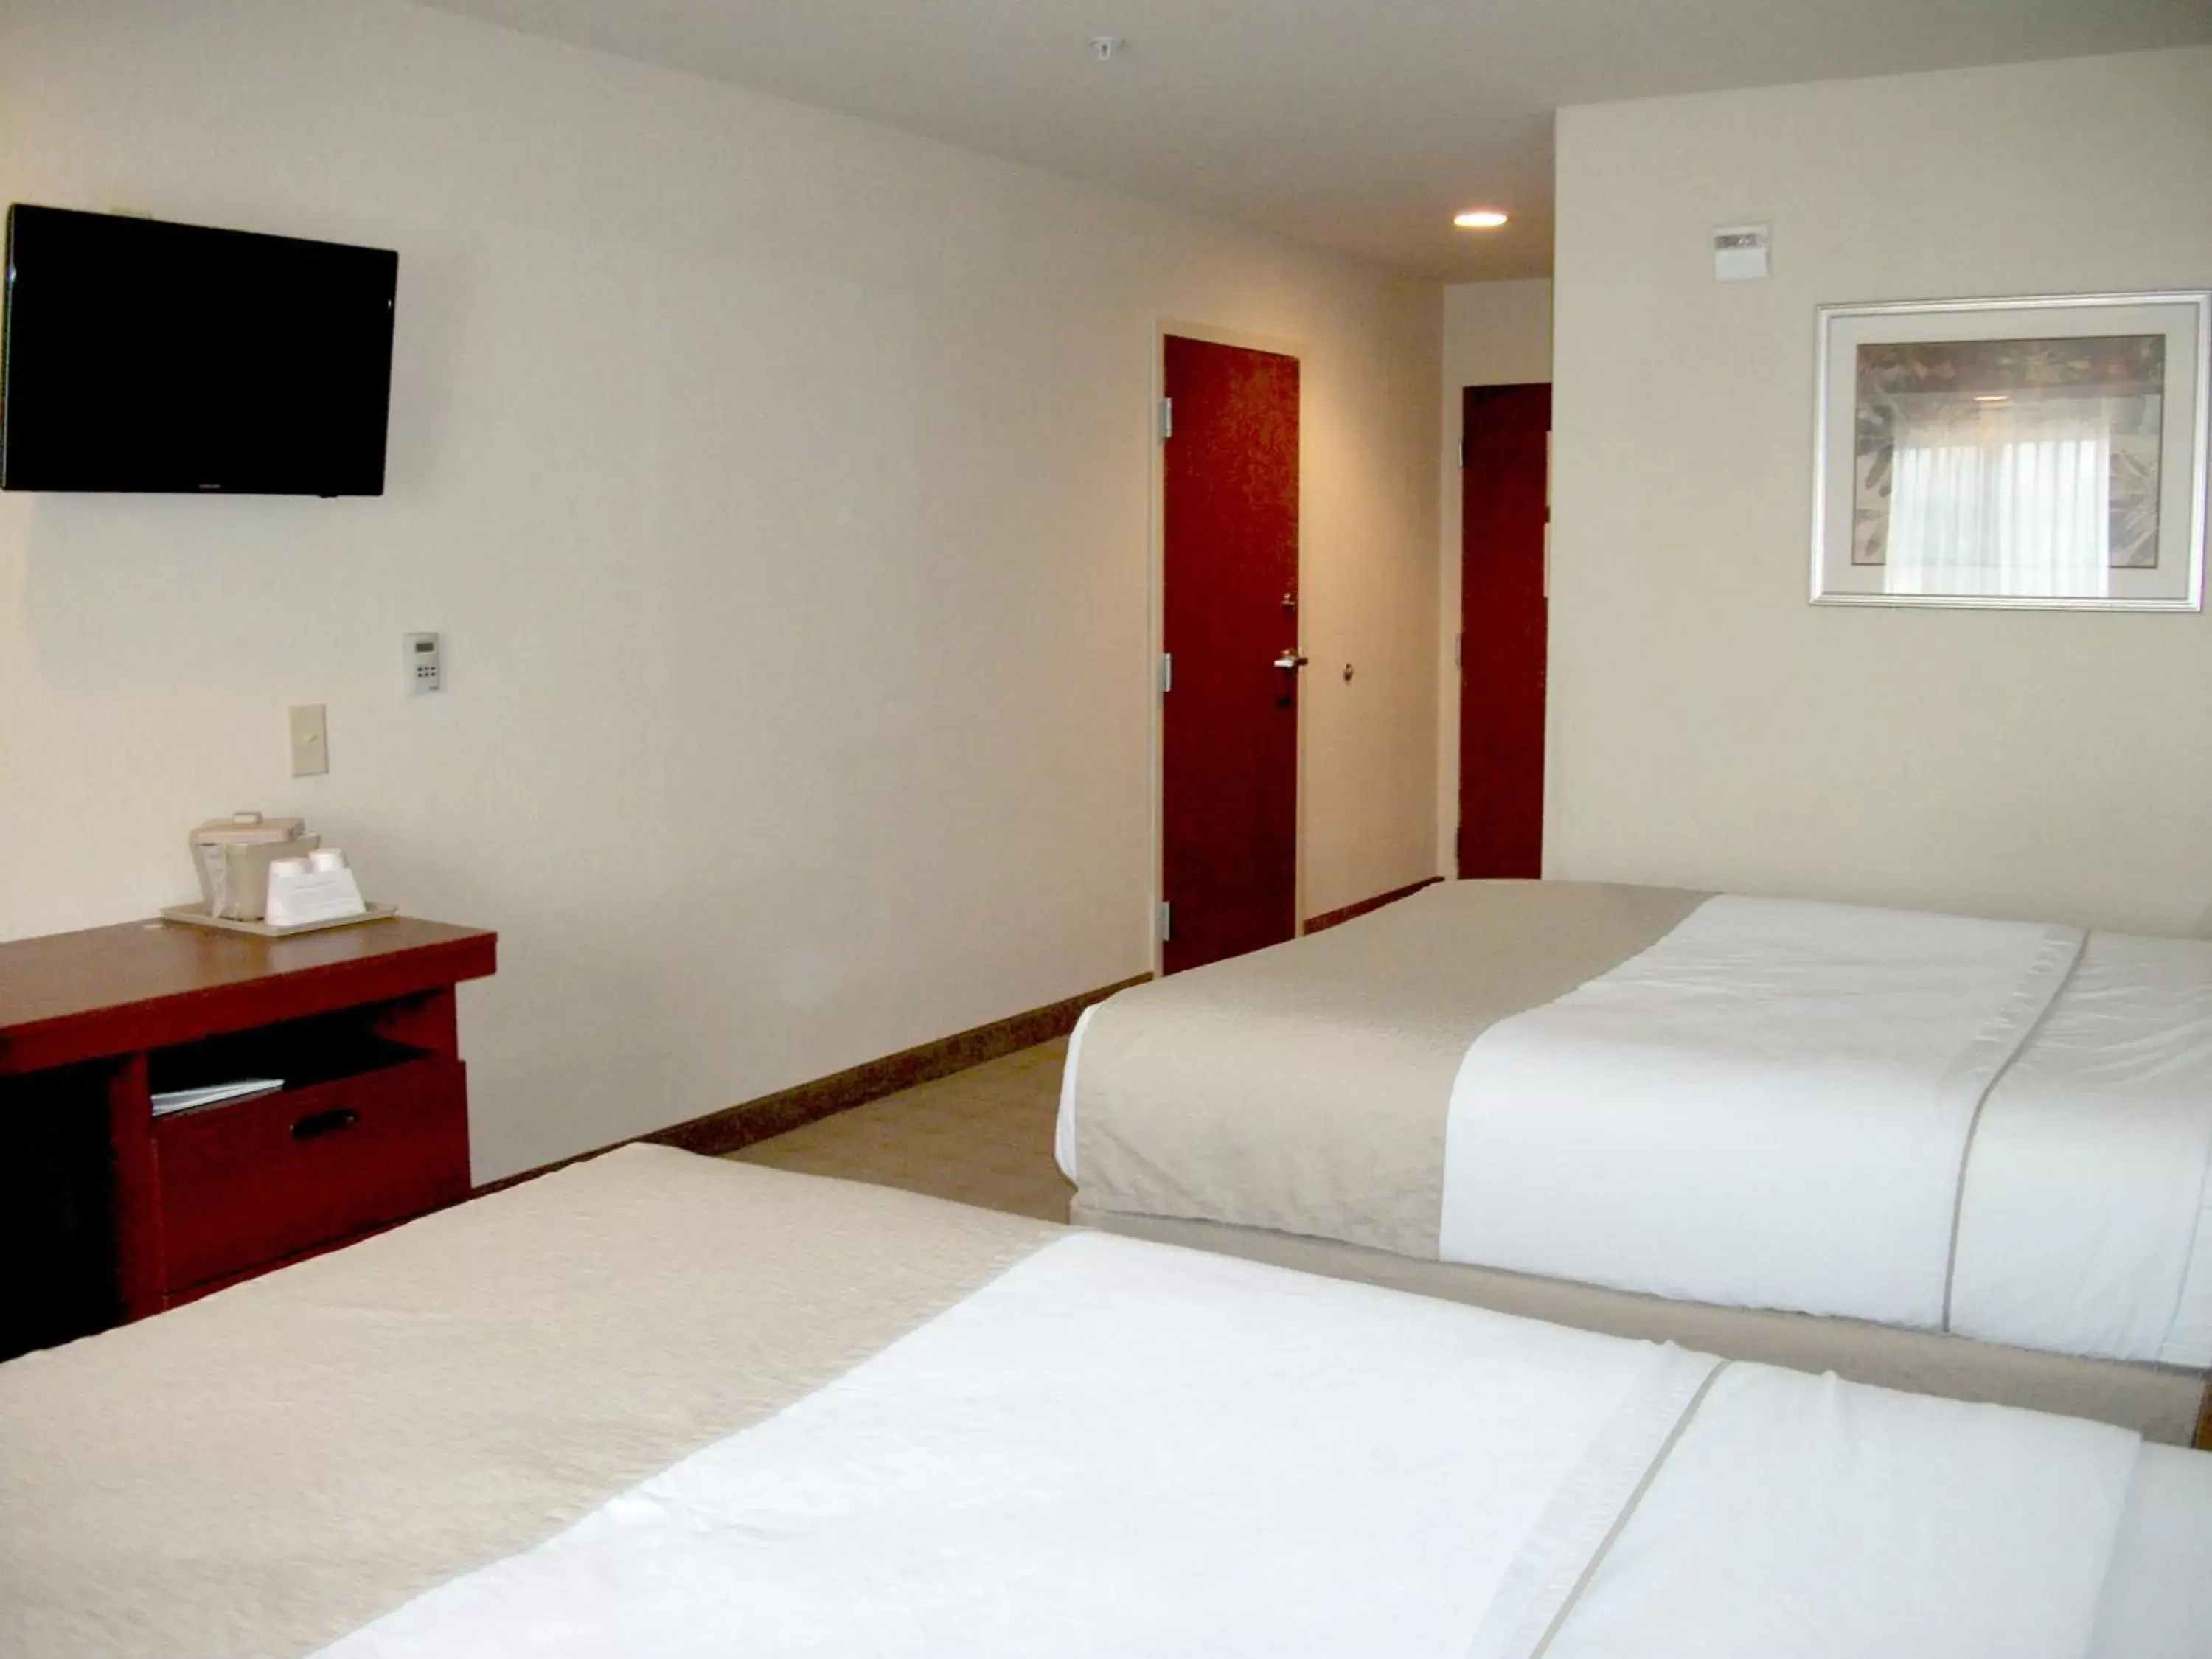 Deluxe Queen Room with Two Queen Beds - Disability Access - Non-Smoking in Microtel Inn & Suites by Wyndham Jasper